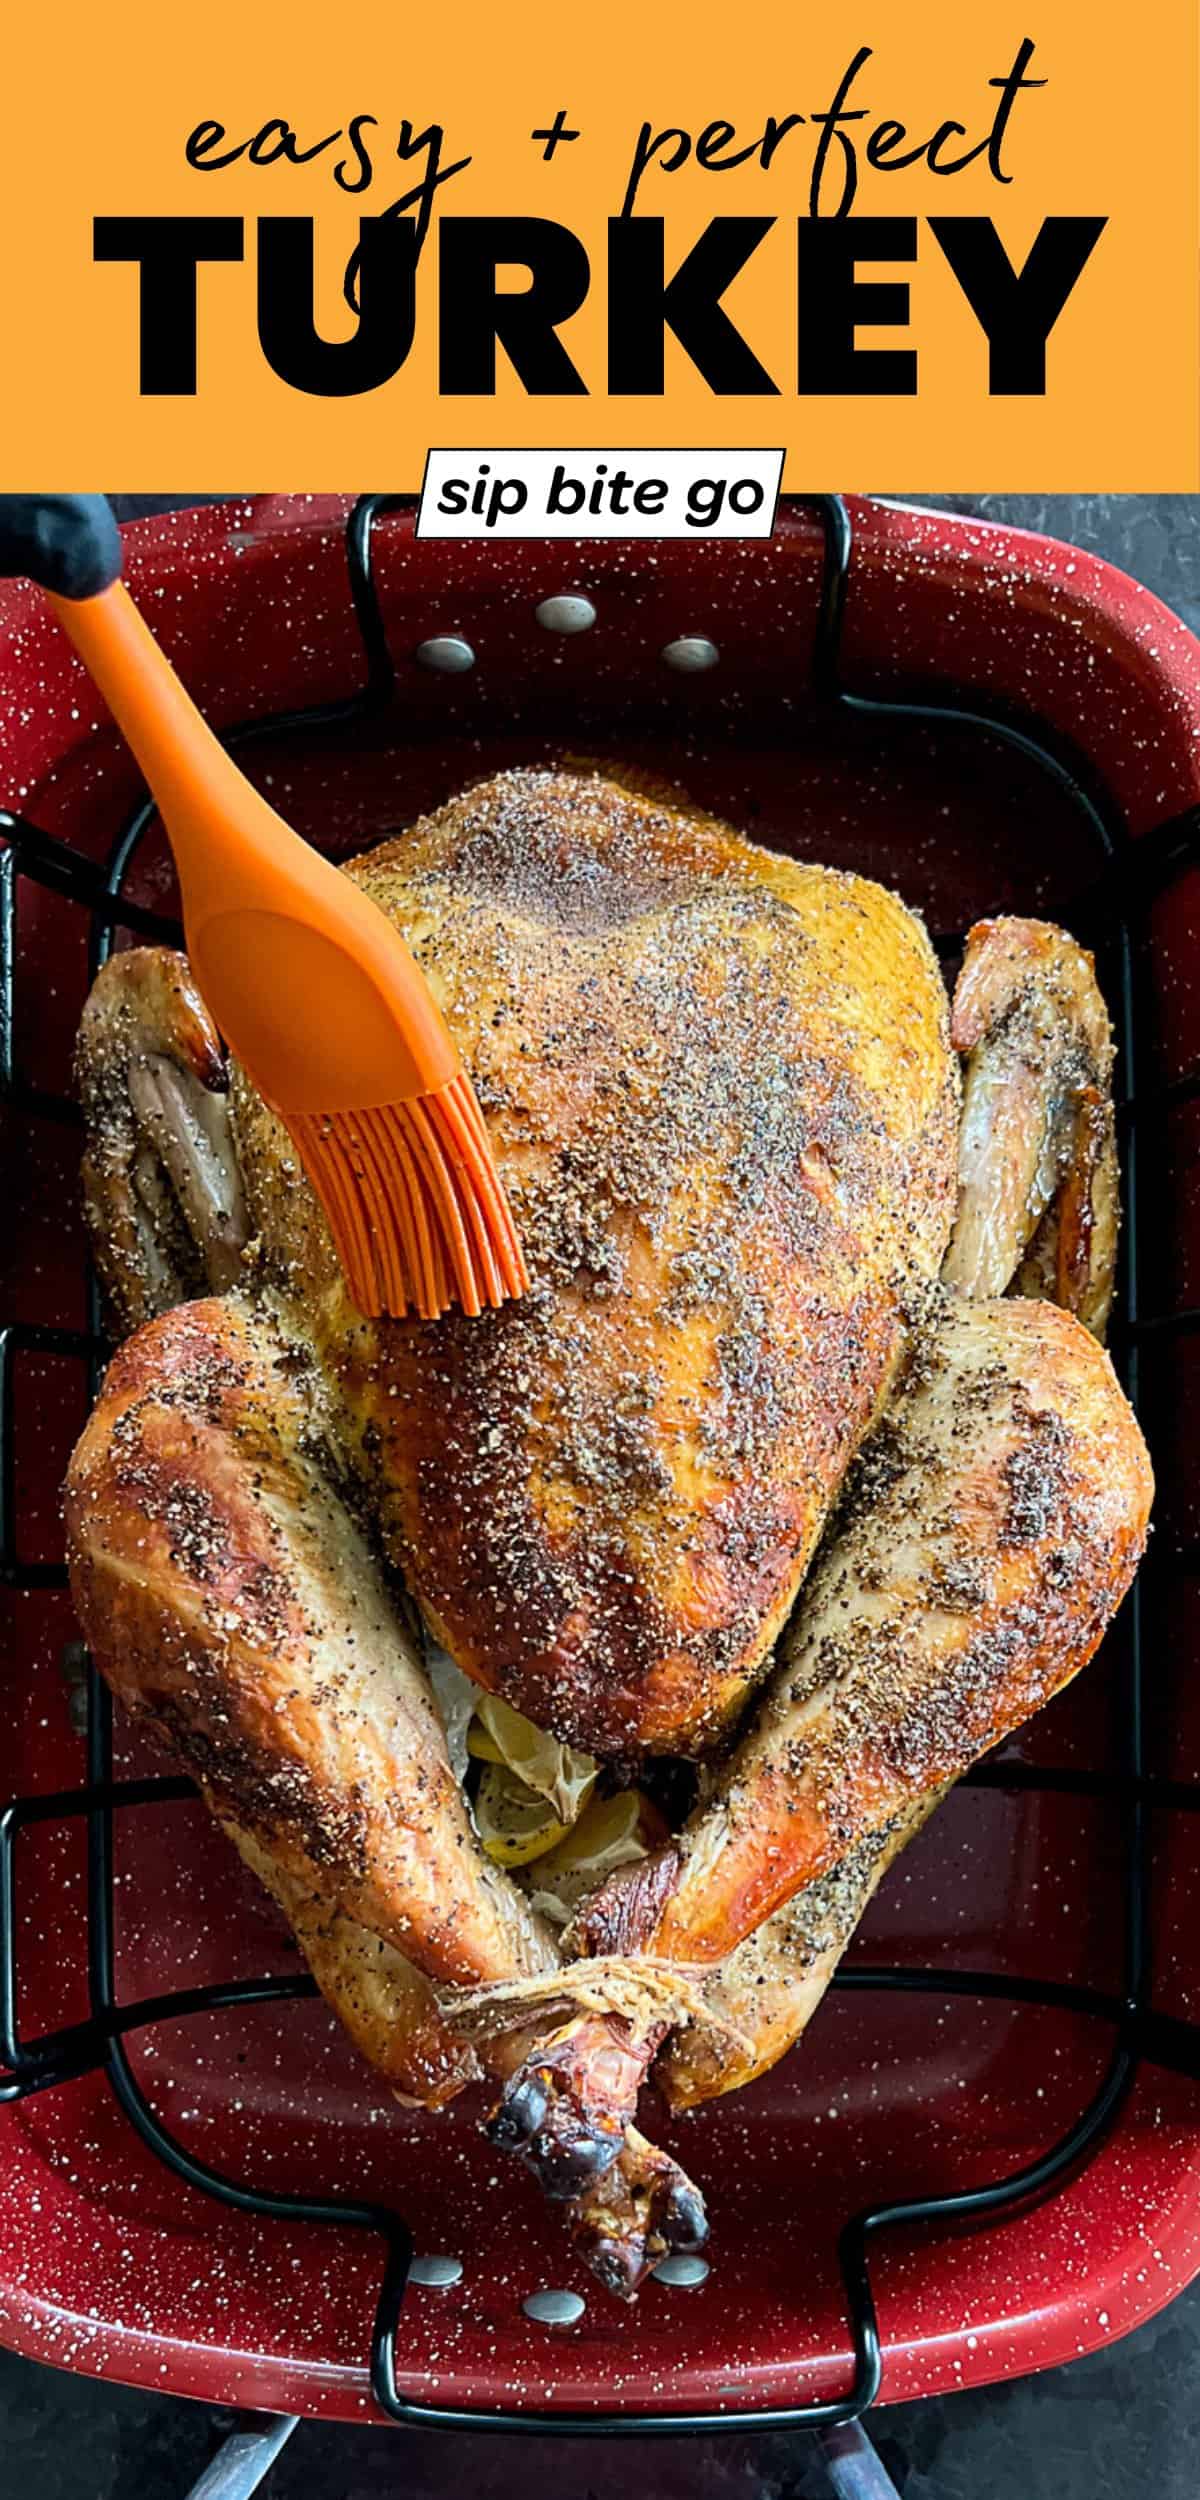 Roasted Turkey Recipe with text overlay and Sip Bite Go logo